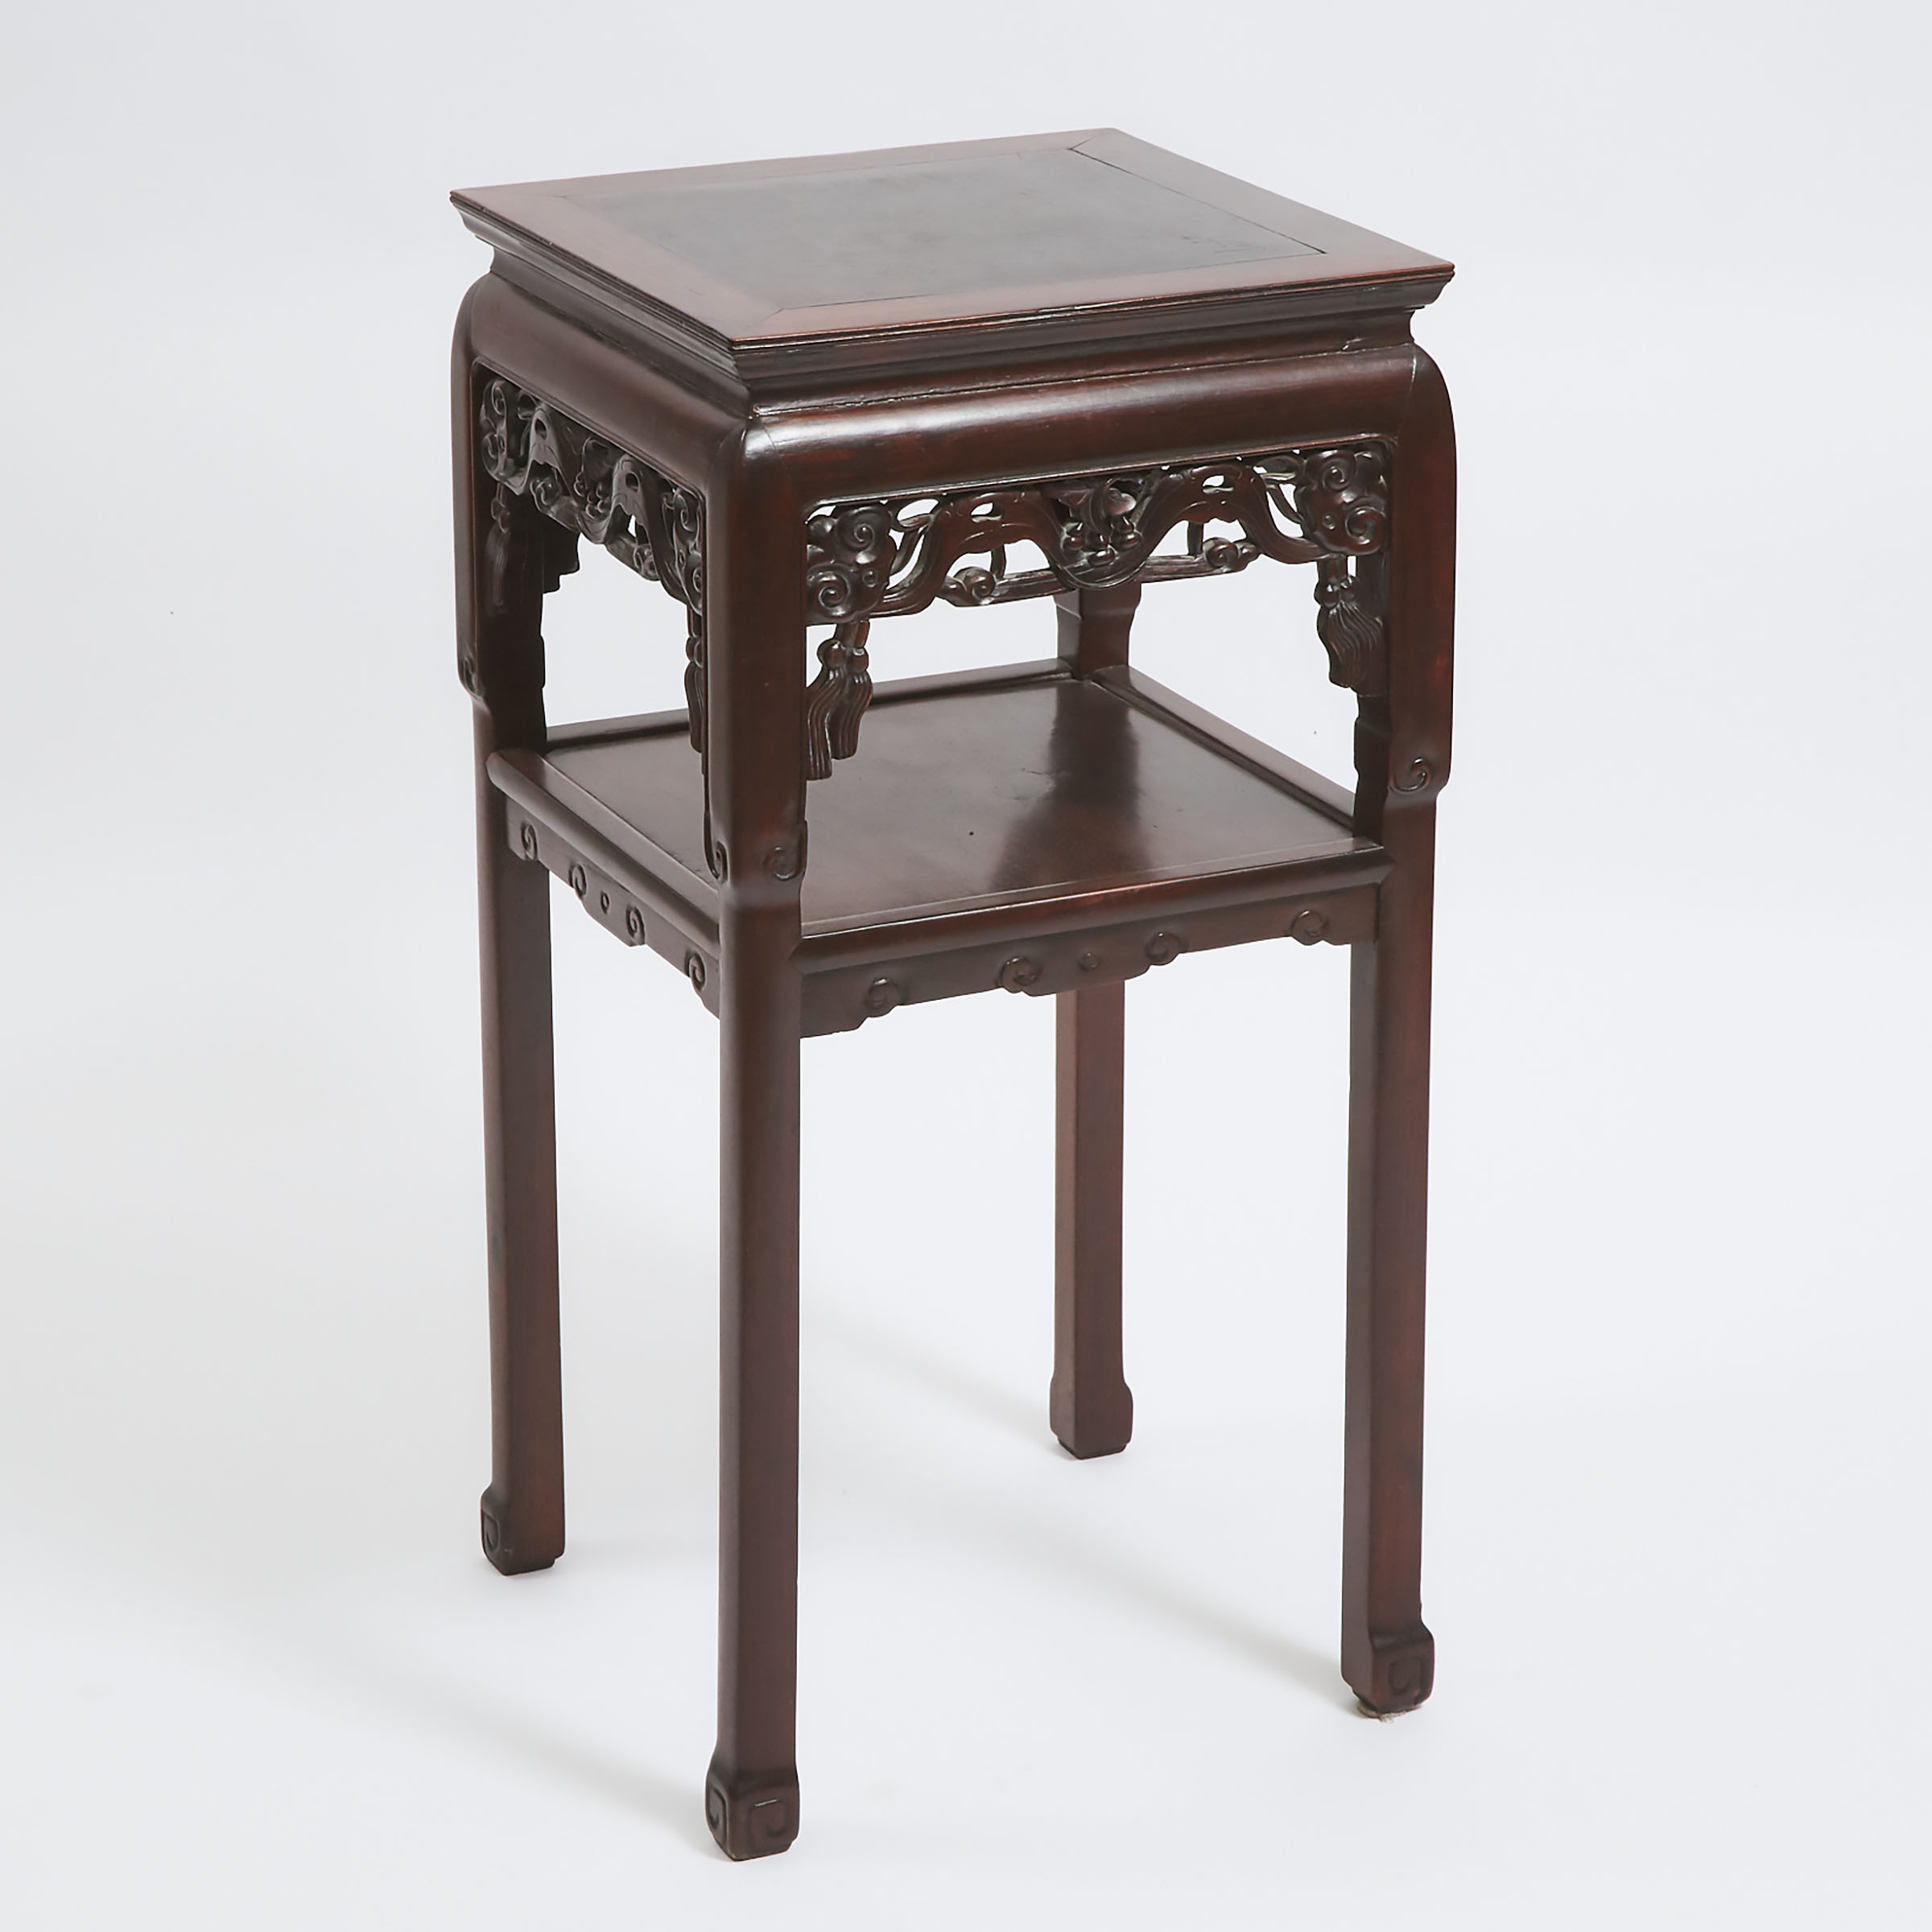 A Chinese Rosewood Square Table  3ac202